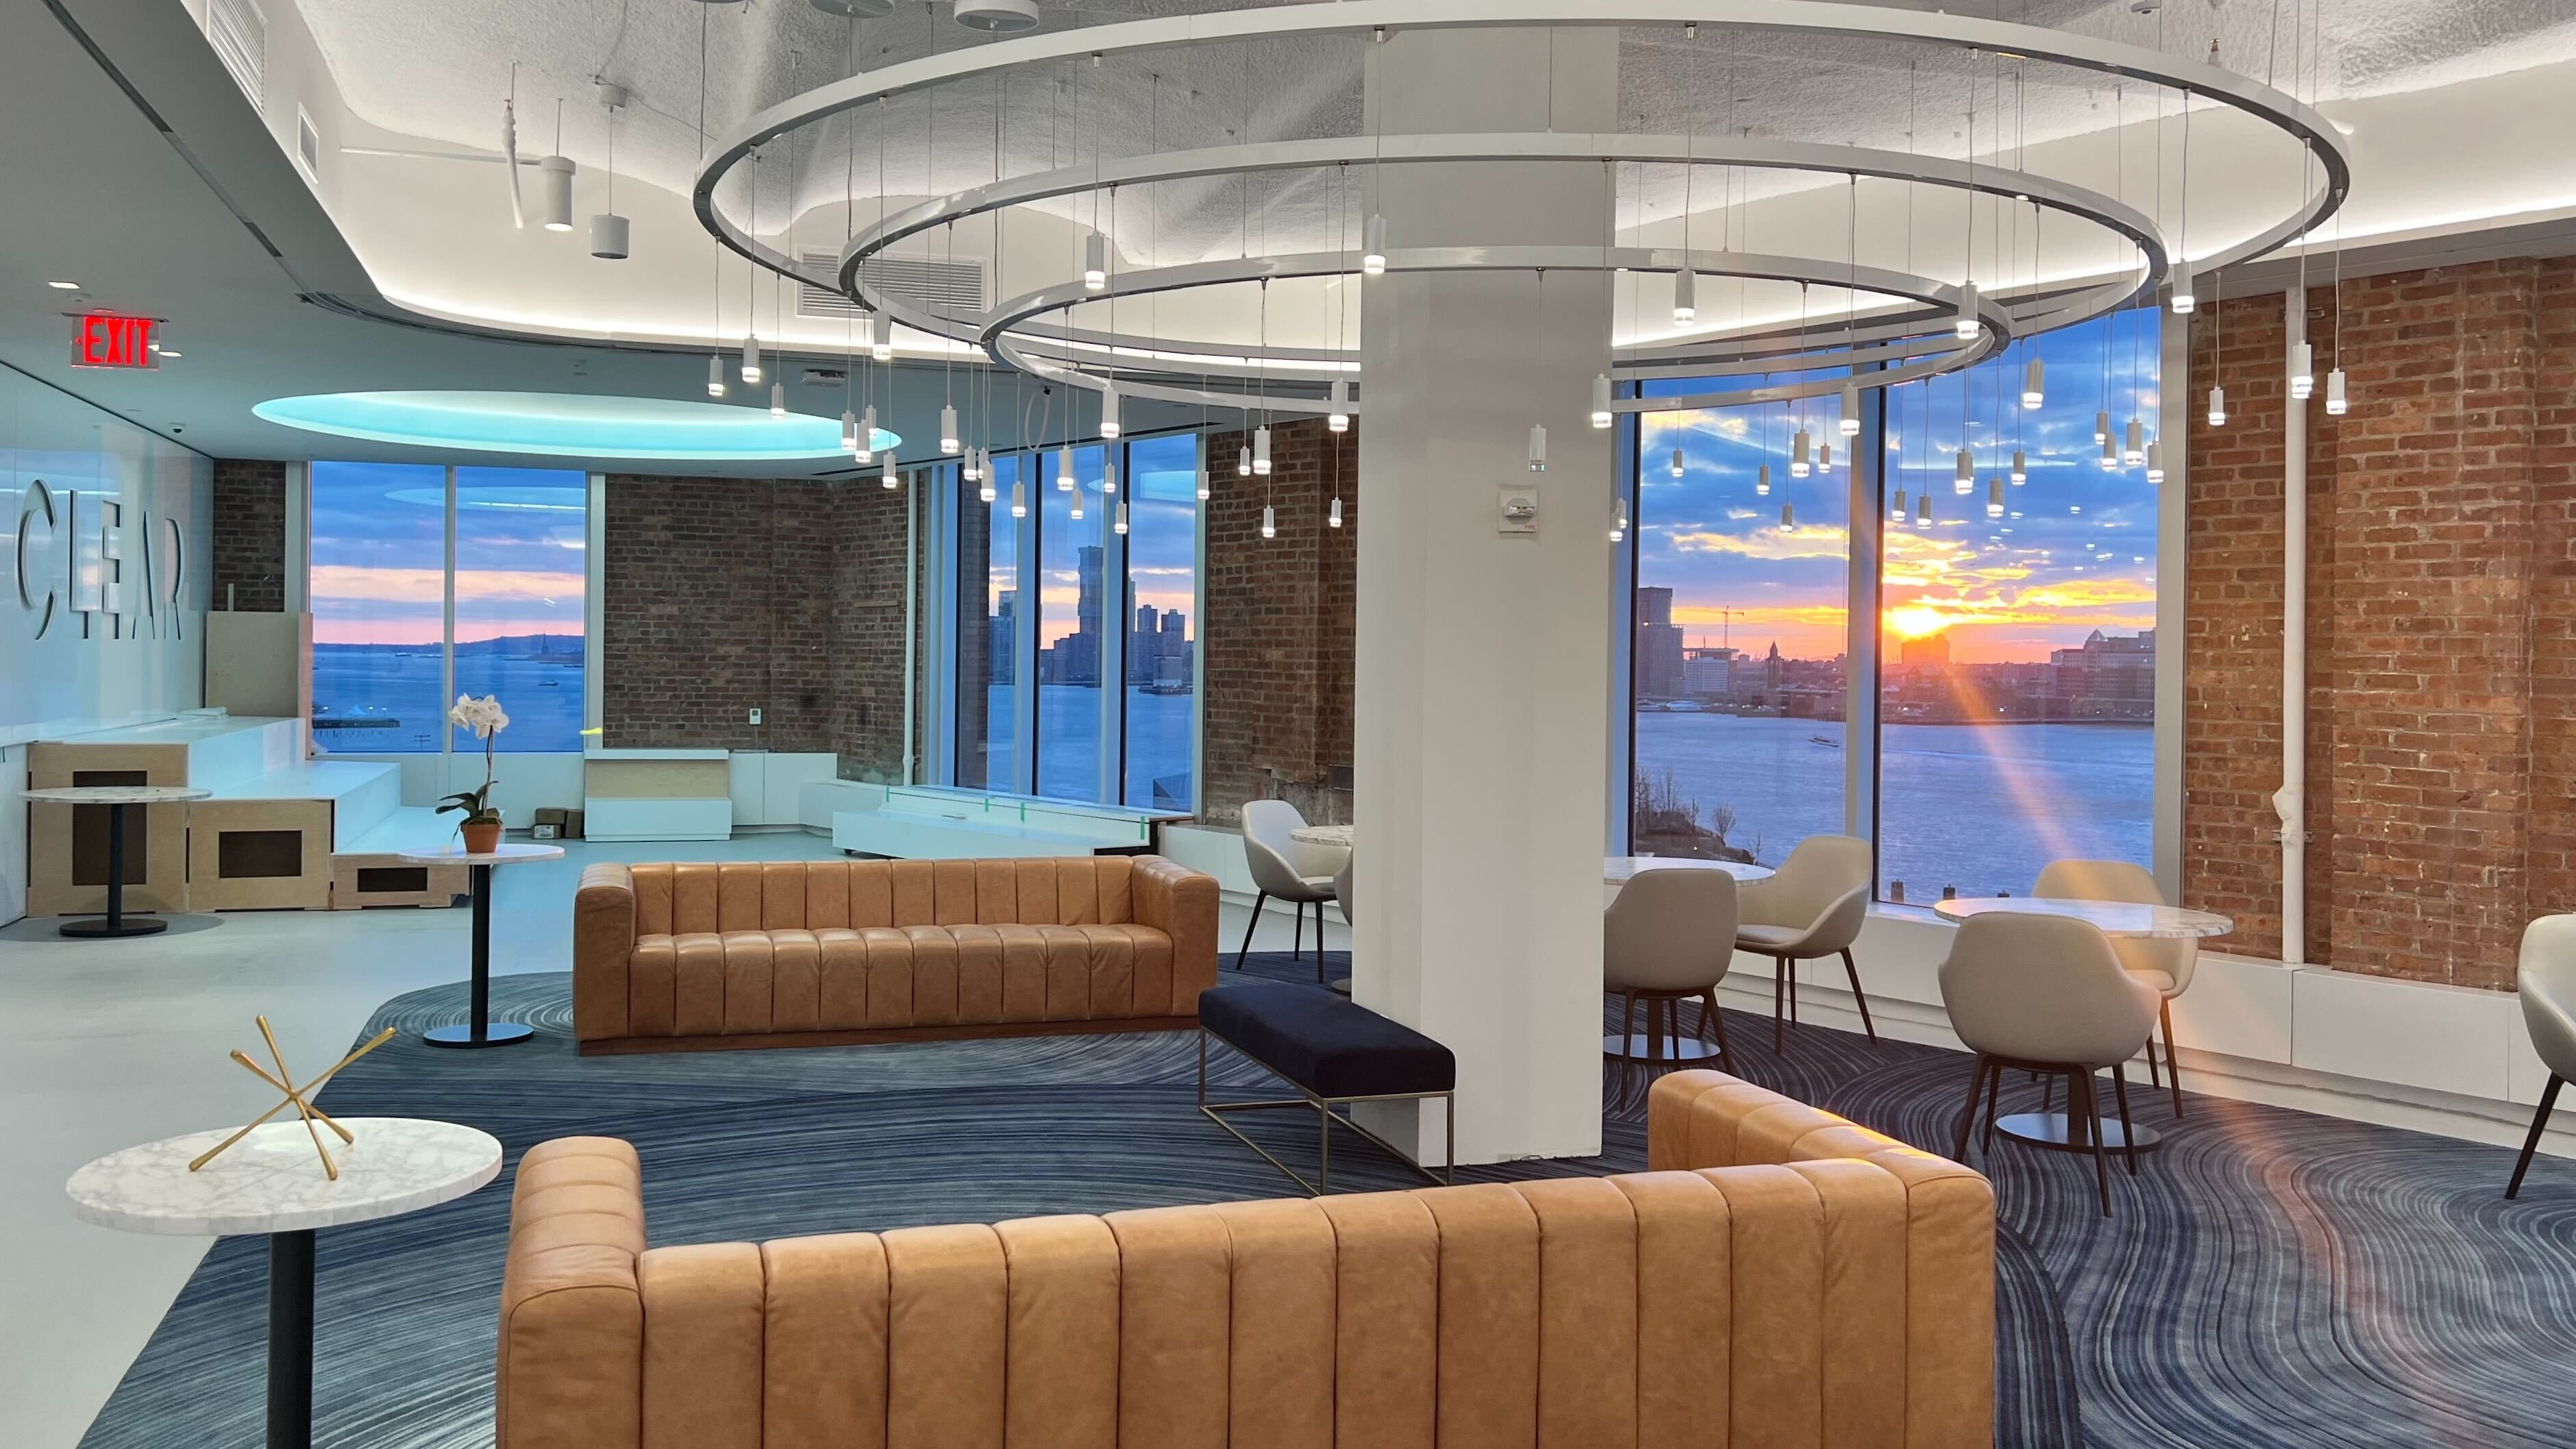 Photo of CLEAR office space with panoramic views at sunset